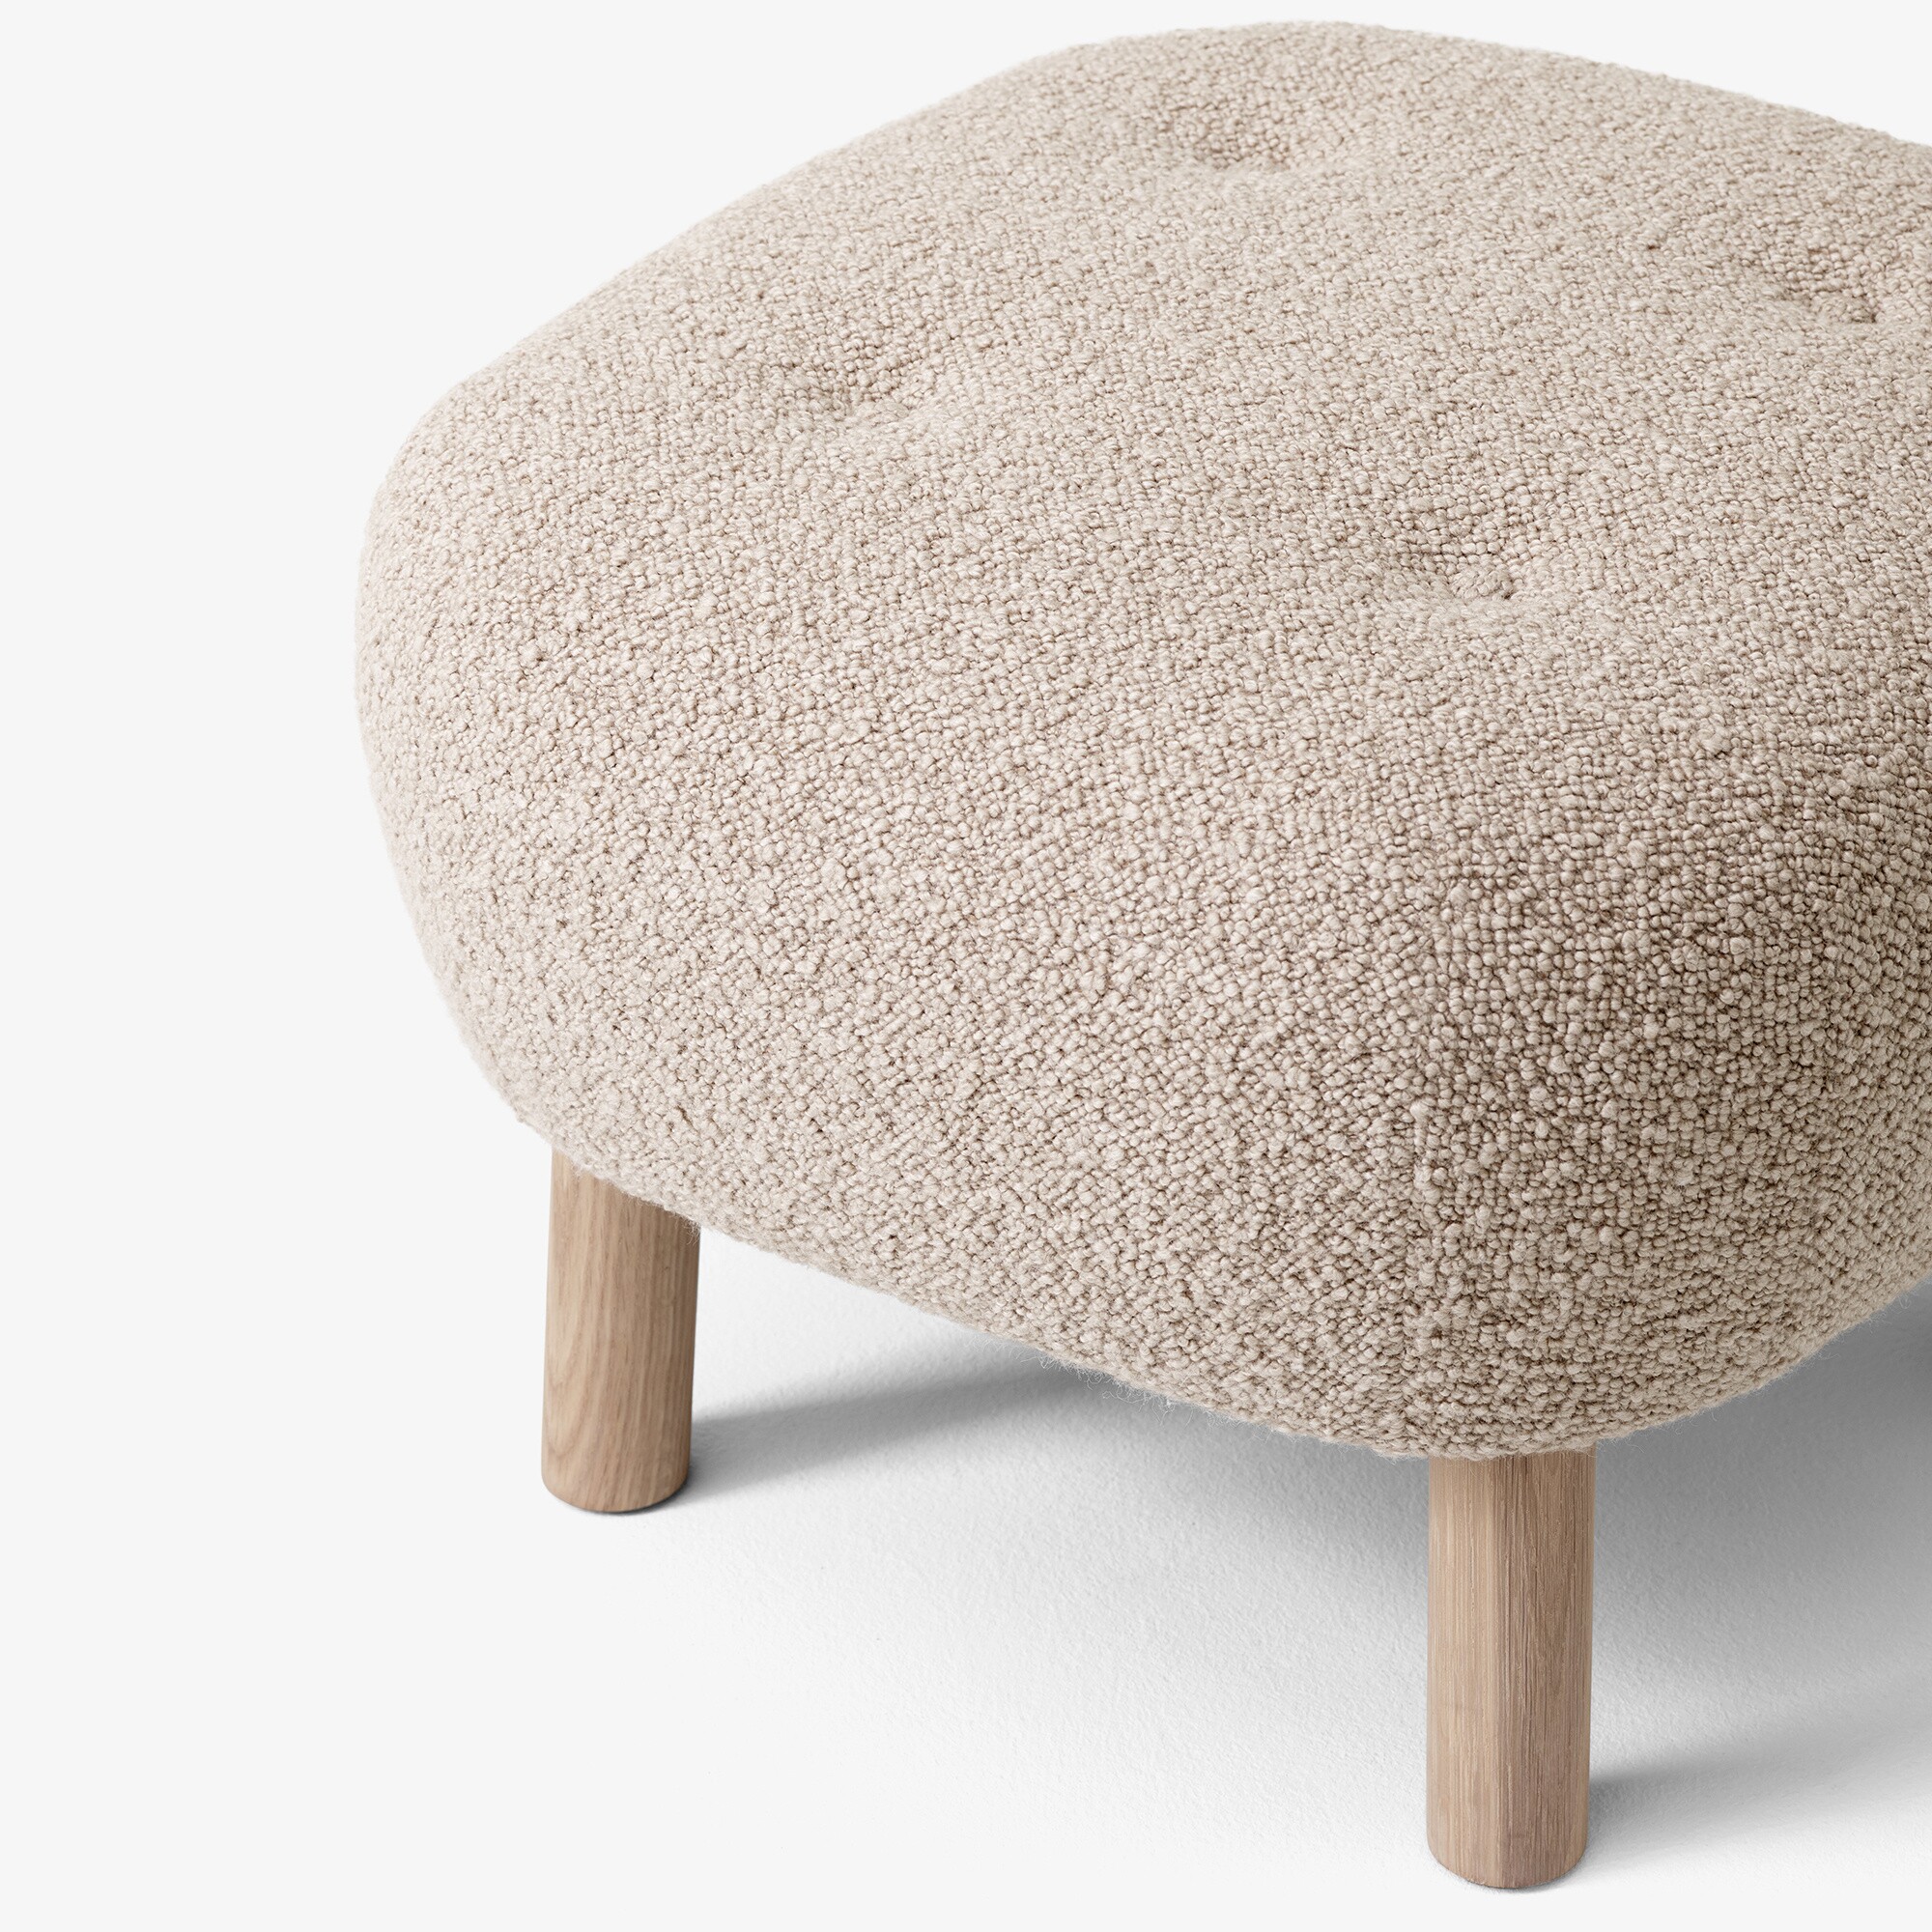 &Tradition Pouf ATD20 Ottoman Gestell Eiche   AmbienteDirect